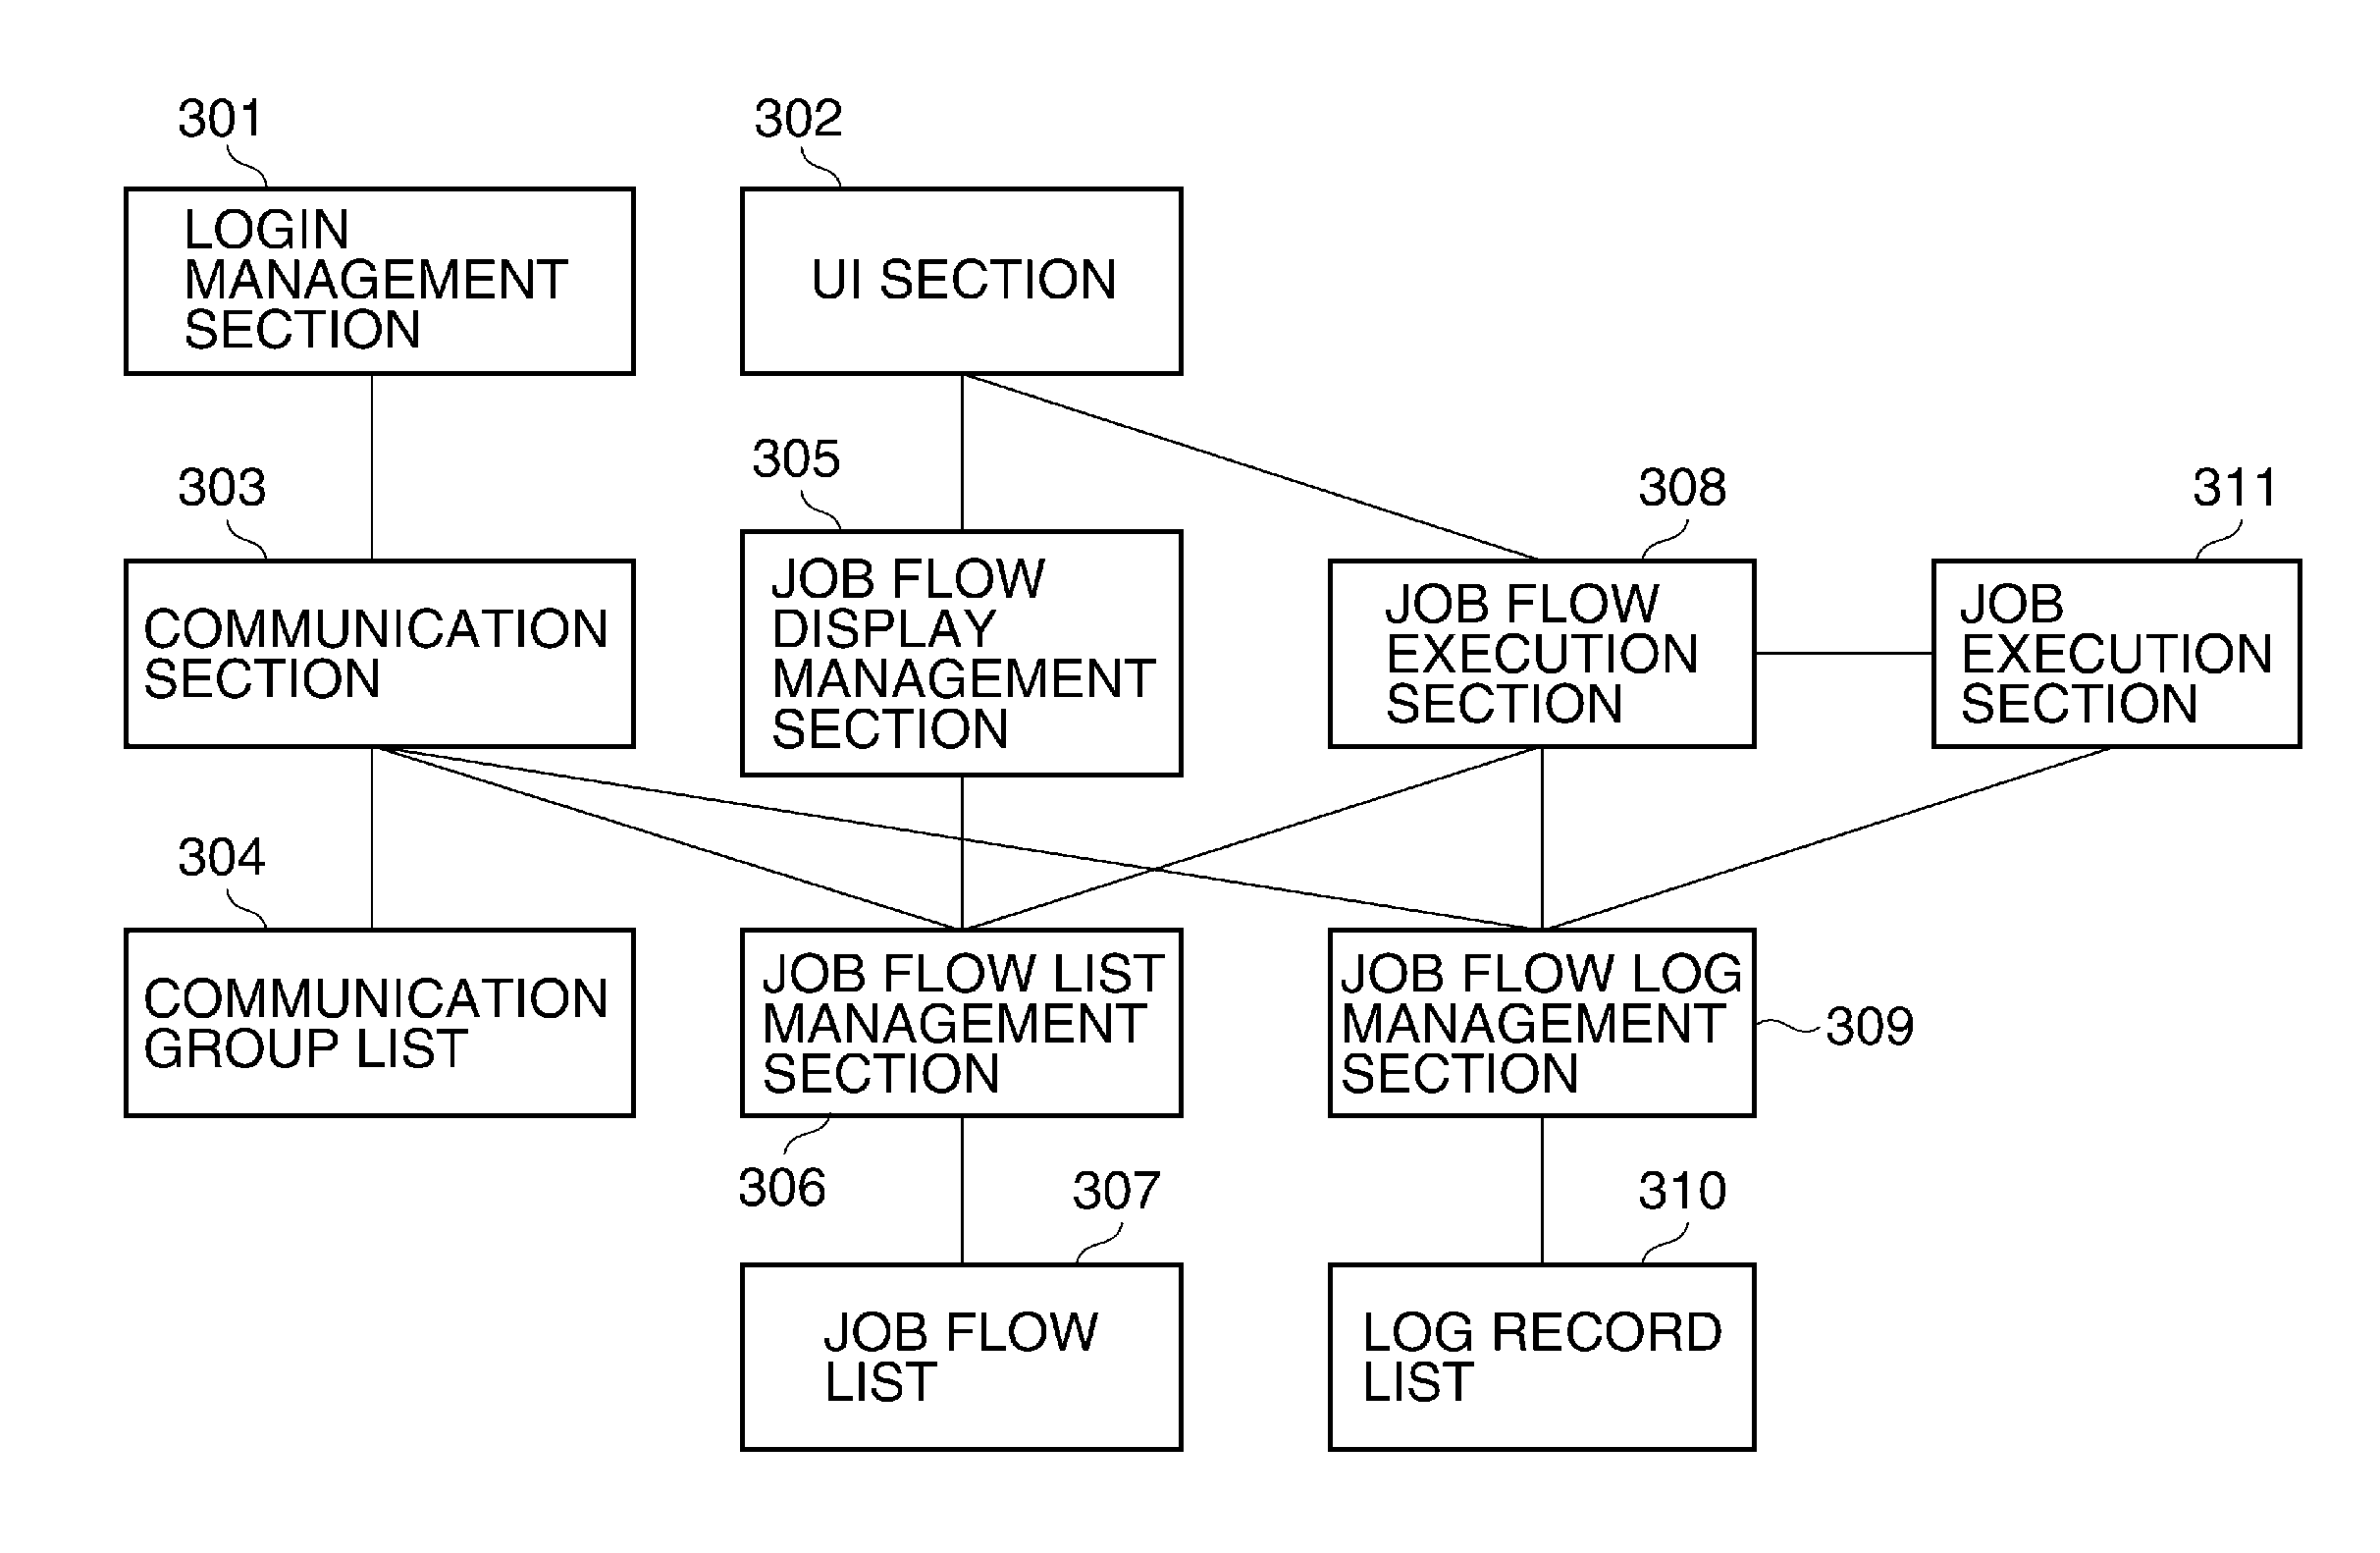 Image processing apparatus, method of controlling the same, and storage medium